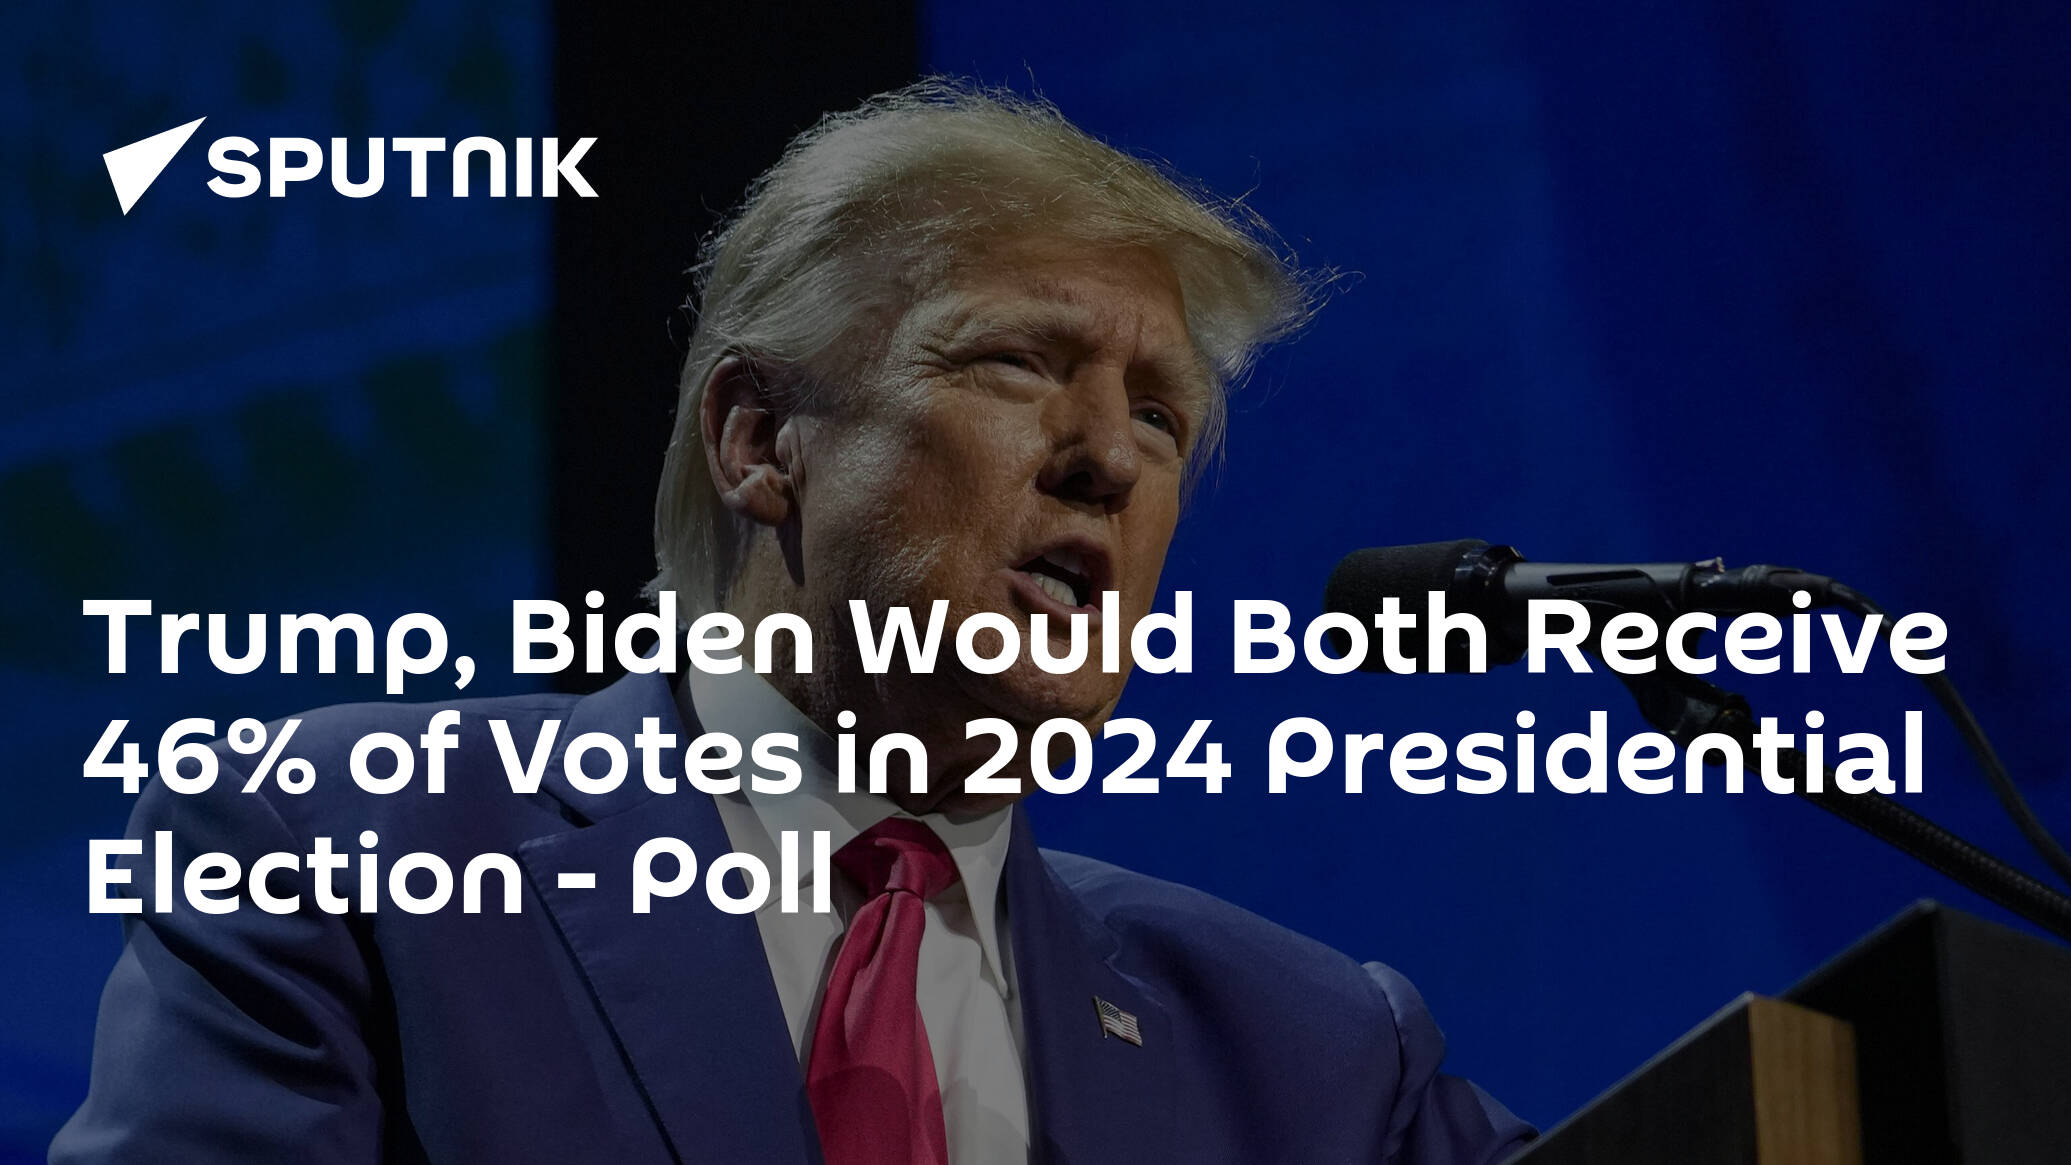 Trump, Biden Would Both Receive 46% of Votes in 2024 Presidential Election – Poll